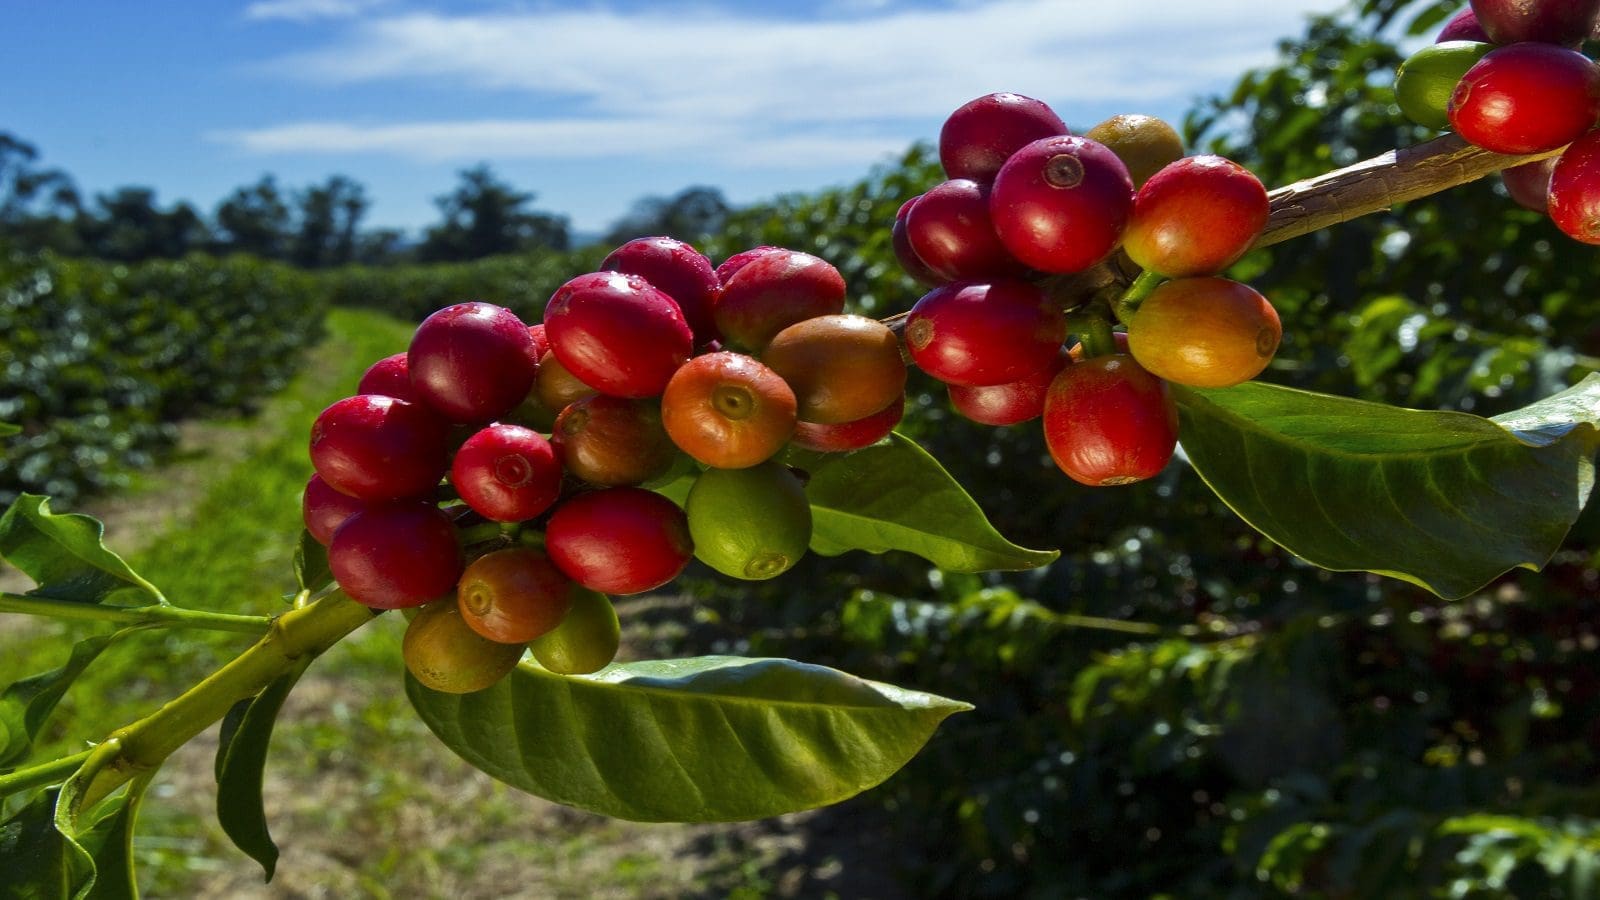 French agricultural merchant LDC celebrates 10 years of coffee origination in Ethiopia 